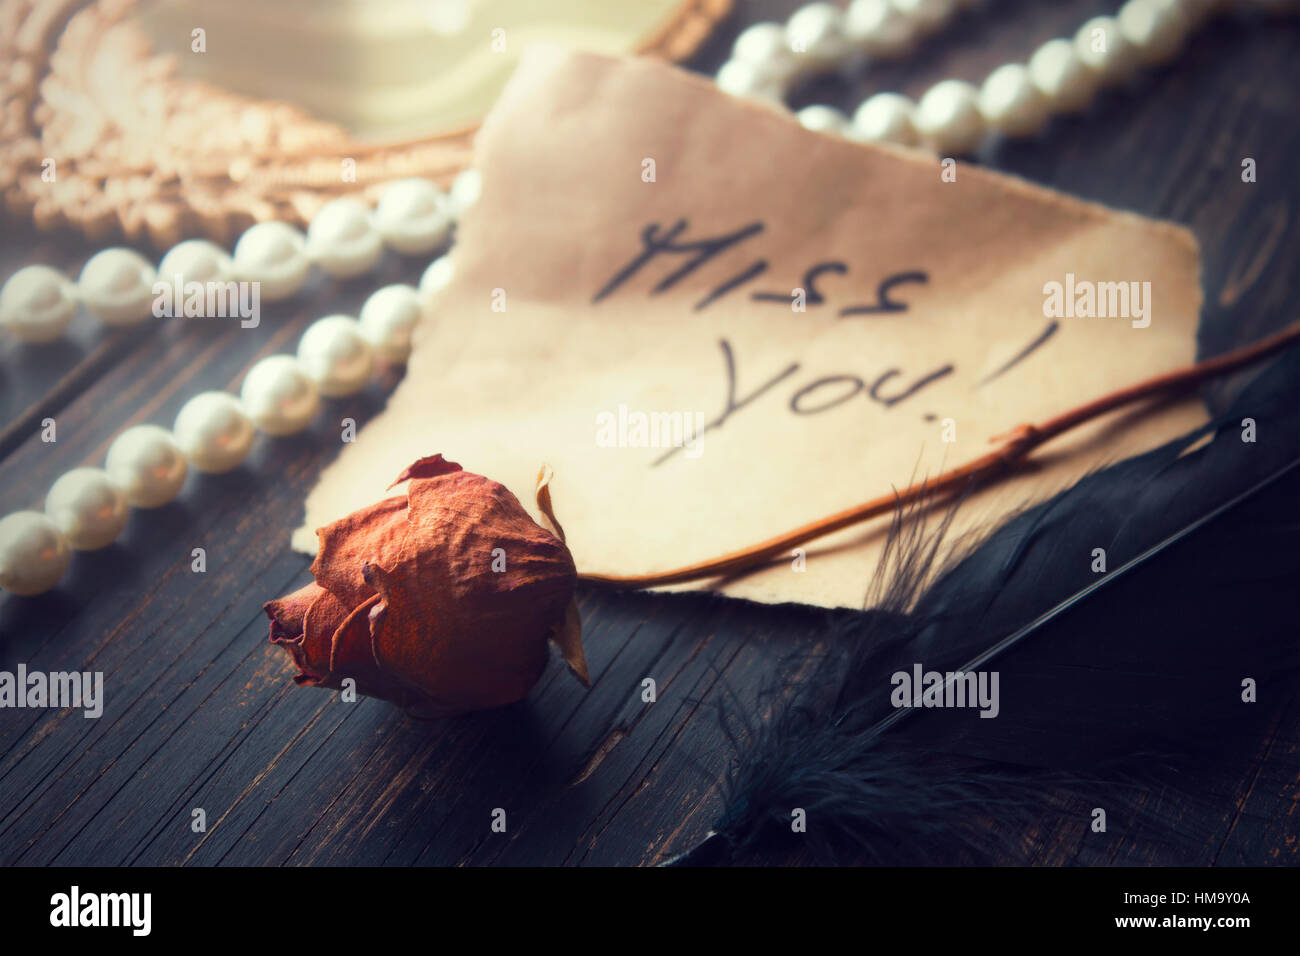 Love note on an old parchment paper with words miss you on it, decorated with old withered rose and some pearls in background Stock Photo